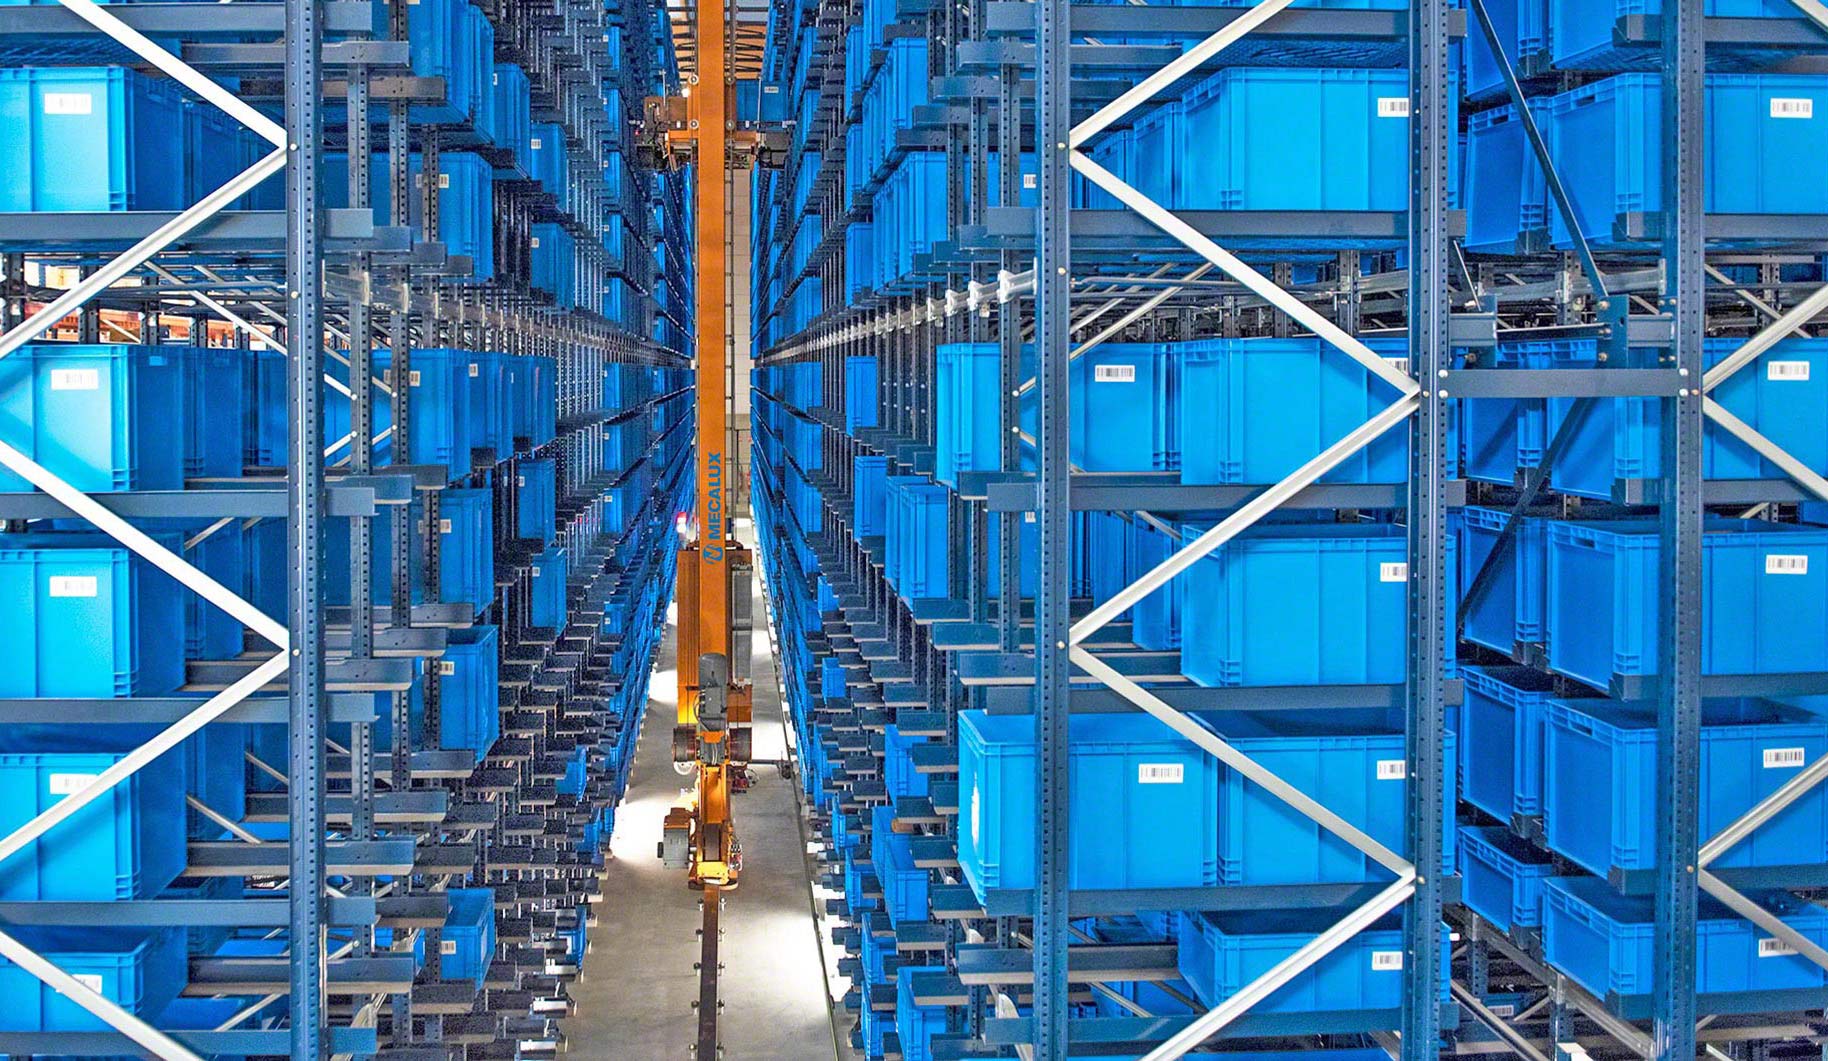 The Pallet Shuttle system is an effective solution for optimising warehouse space